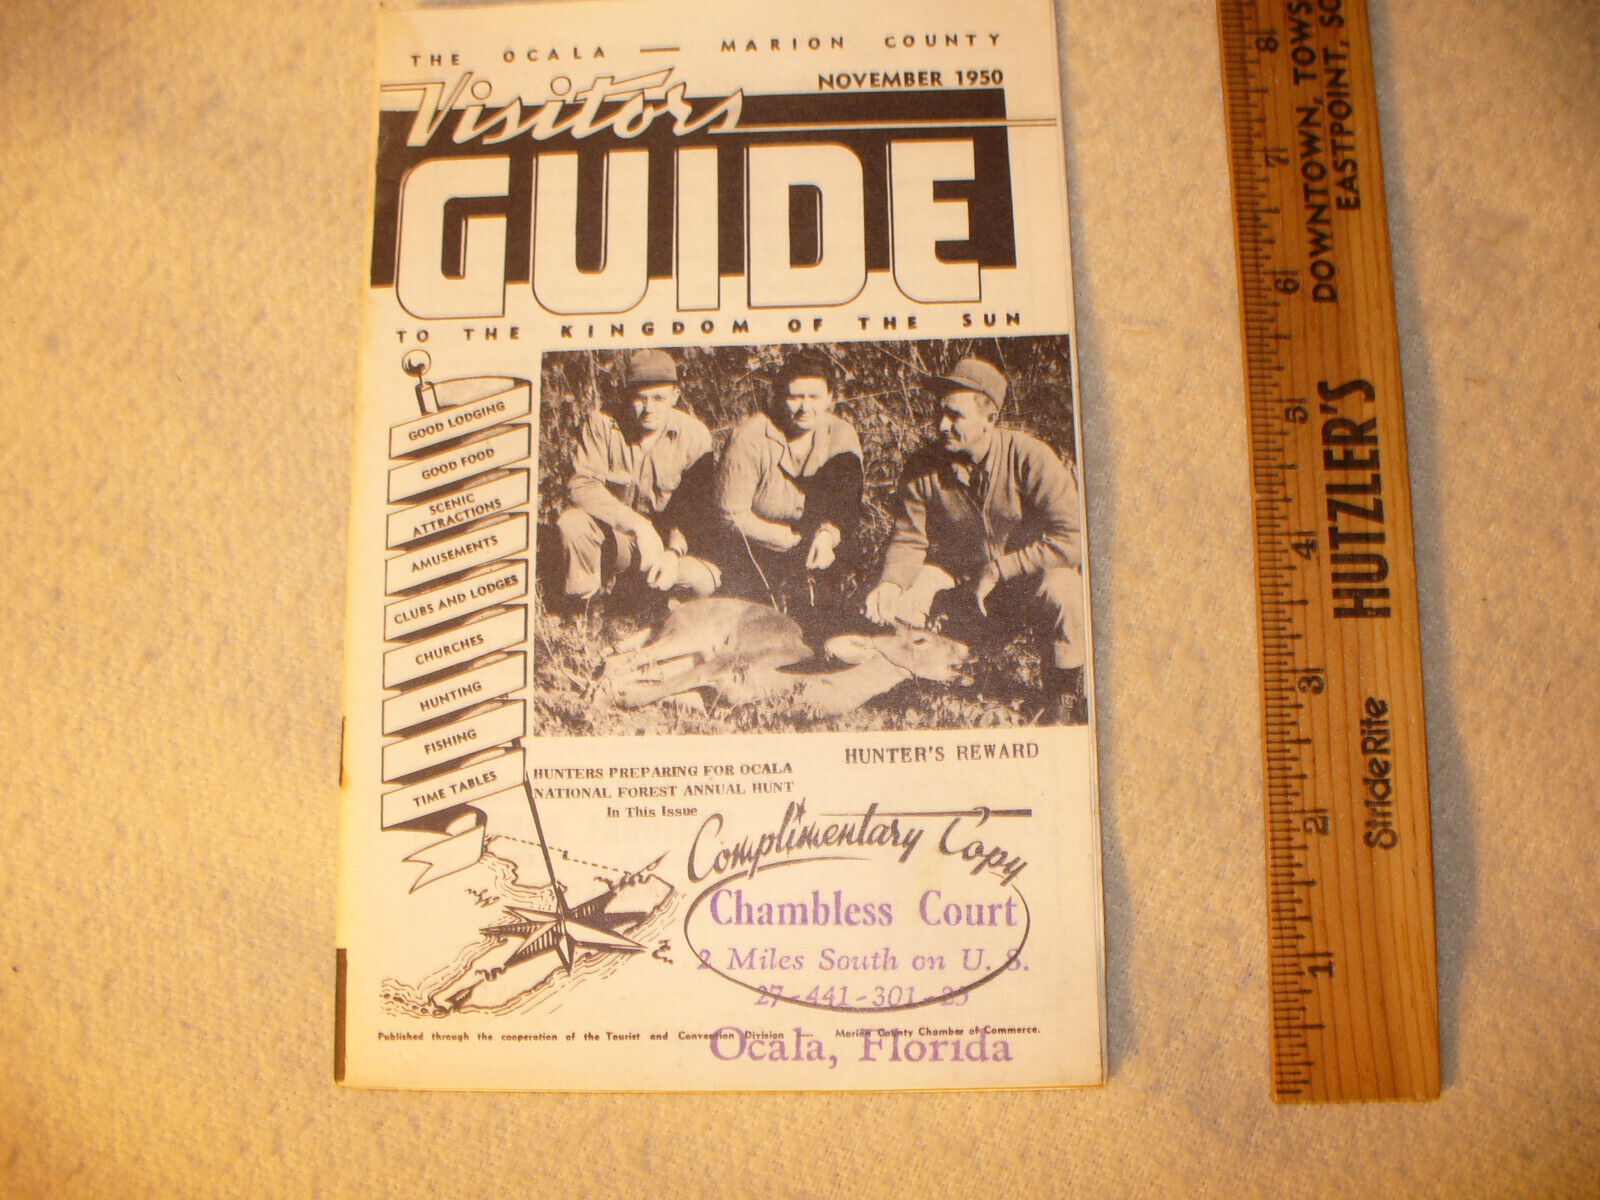 1950 Nov. Ocala- Marion County Visitors Guide 23 page Booklet Deer Hunting Cover